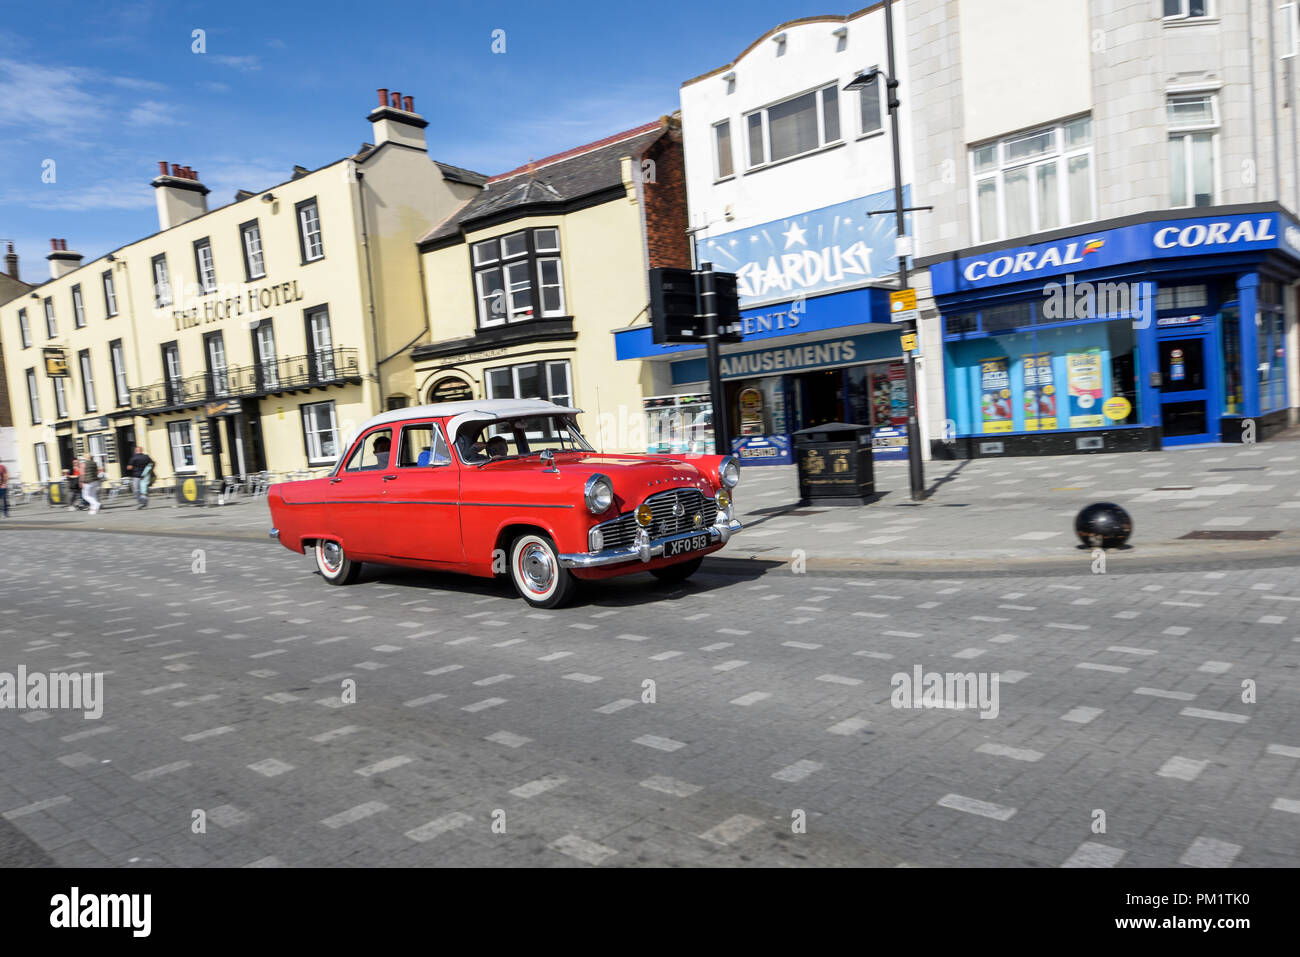 Classic Ford Zephyr saloon car driving along Marine Parade, Southend on Sea, Essex, seafront. Stardust amusements. Red vehicle Stock Photo